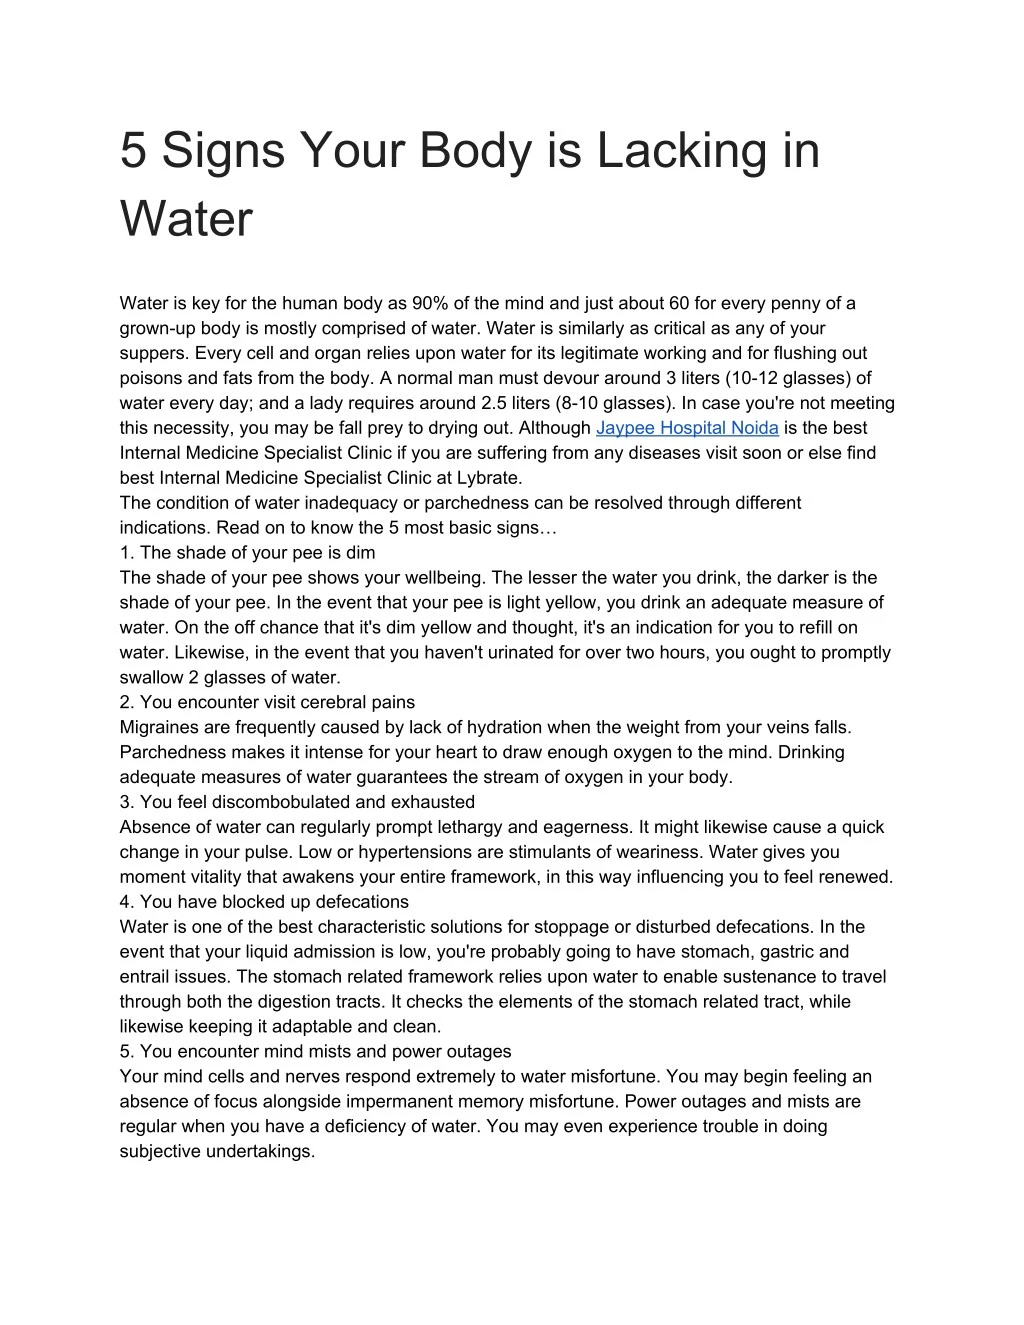 5 signs your body is lacking in water water